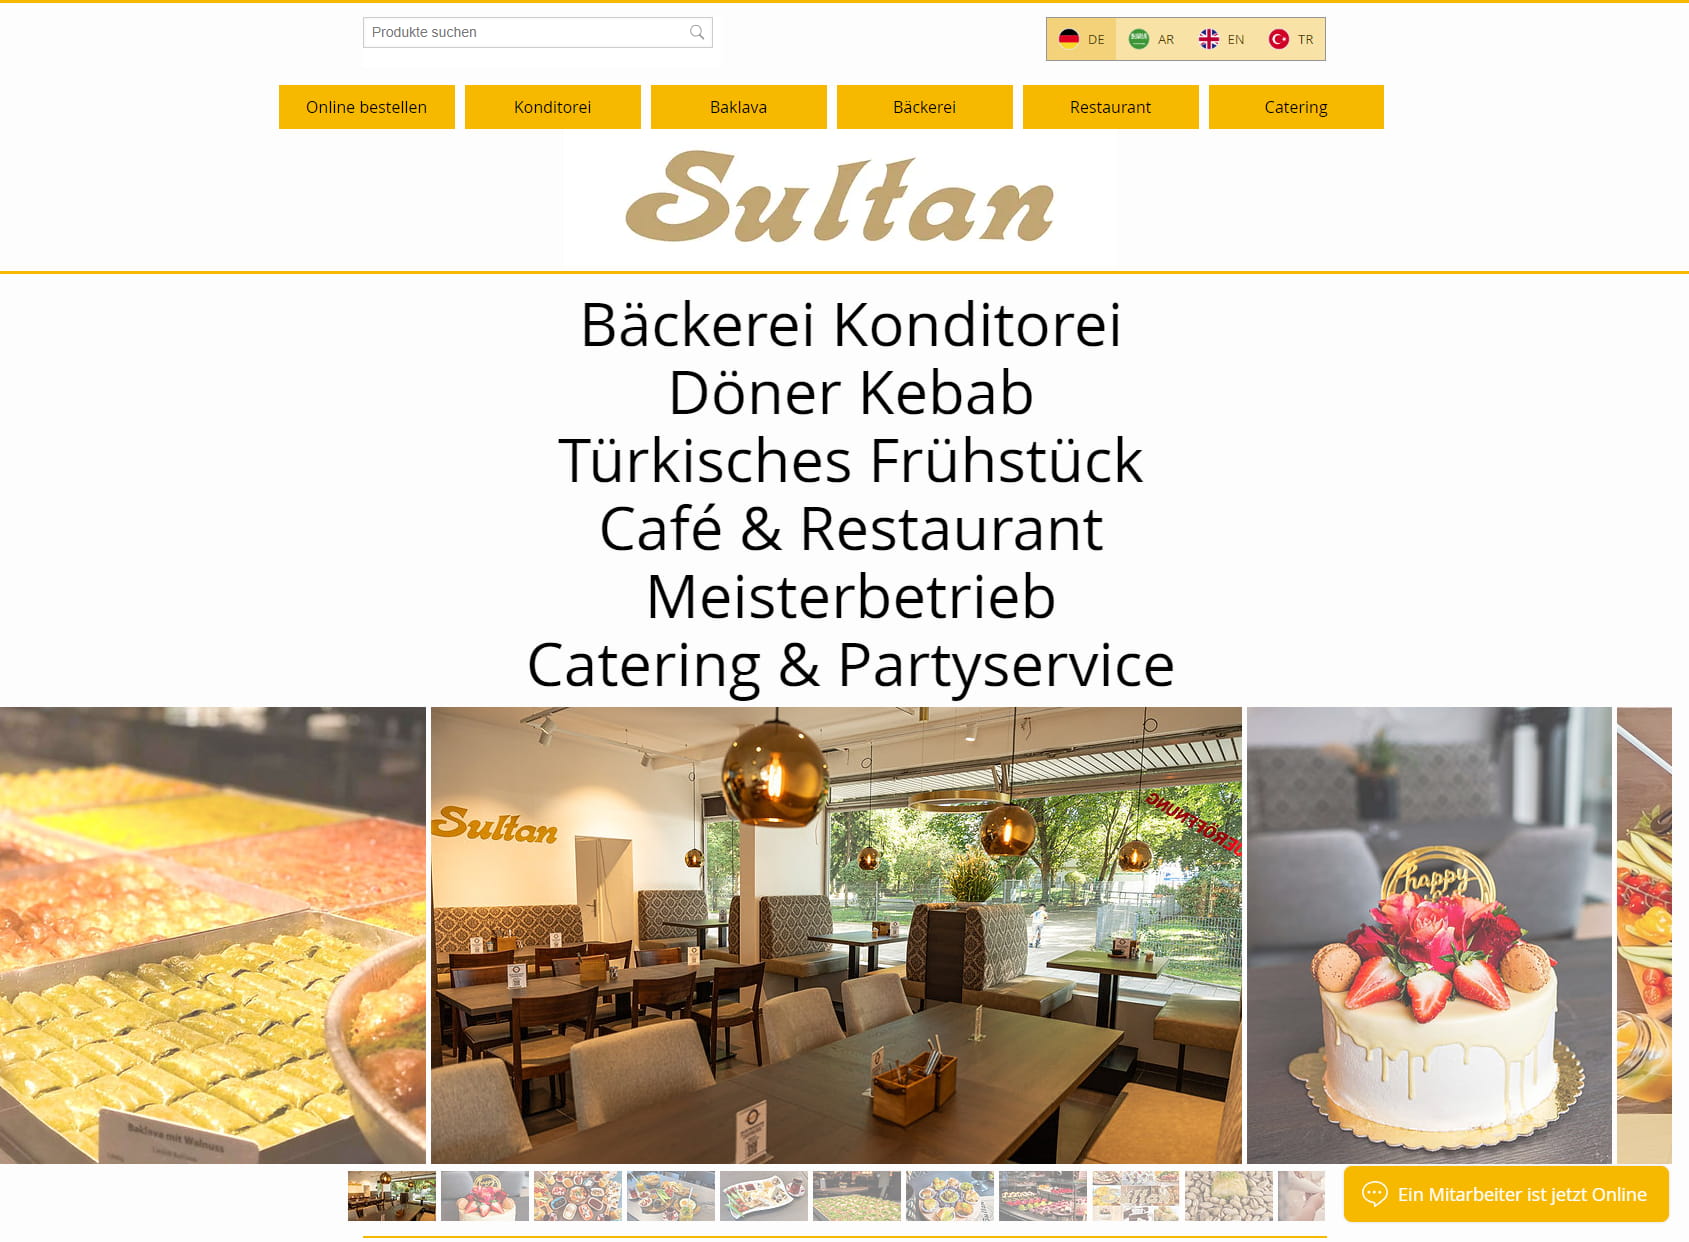 Sultan Backparadies GmbH